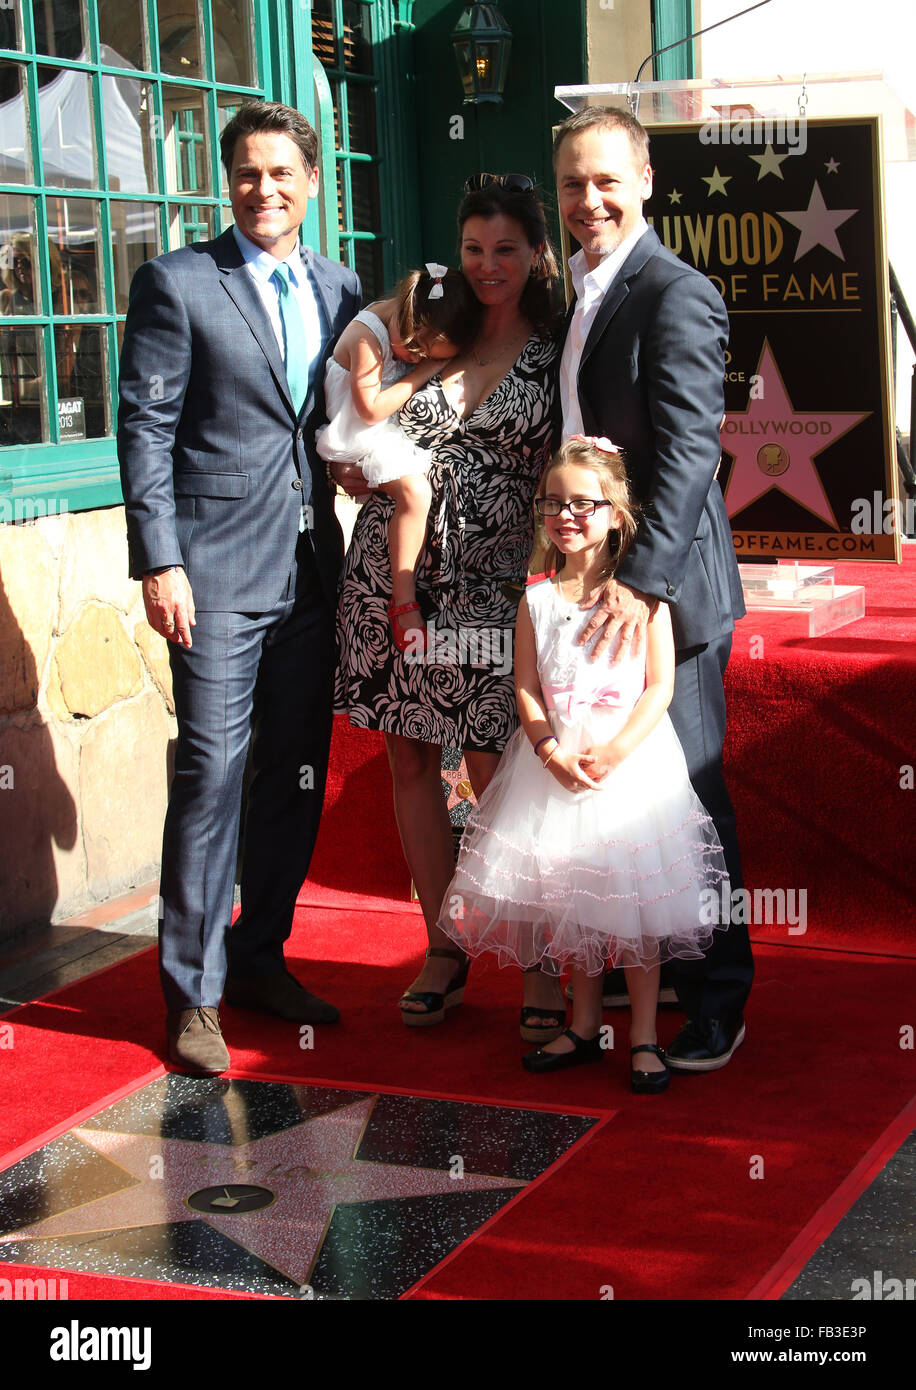 Rob Lowe honored with a star on the Hollywood Walk of Fame  Featuring: Rob Lowe, Chad Lowe, Kim Painter, Mabel Painter Lowe, Fiona Hepler Lowe Where: Hollywood, California, United States When: 08 Dec 2015 Stock Photo